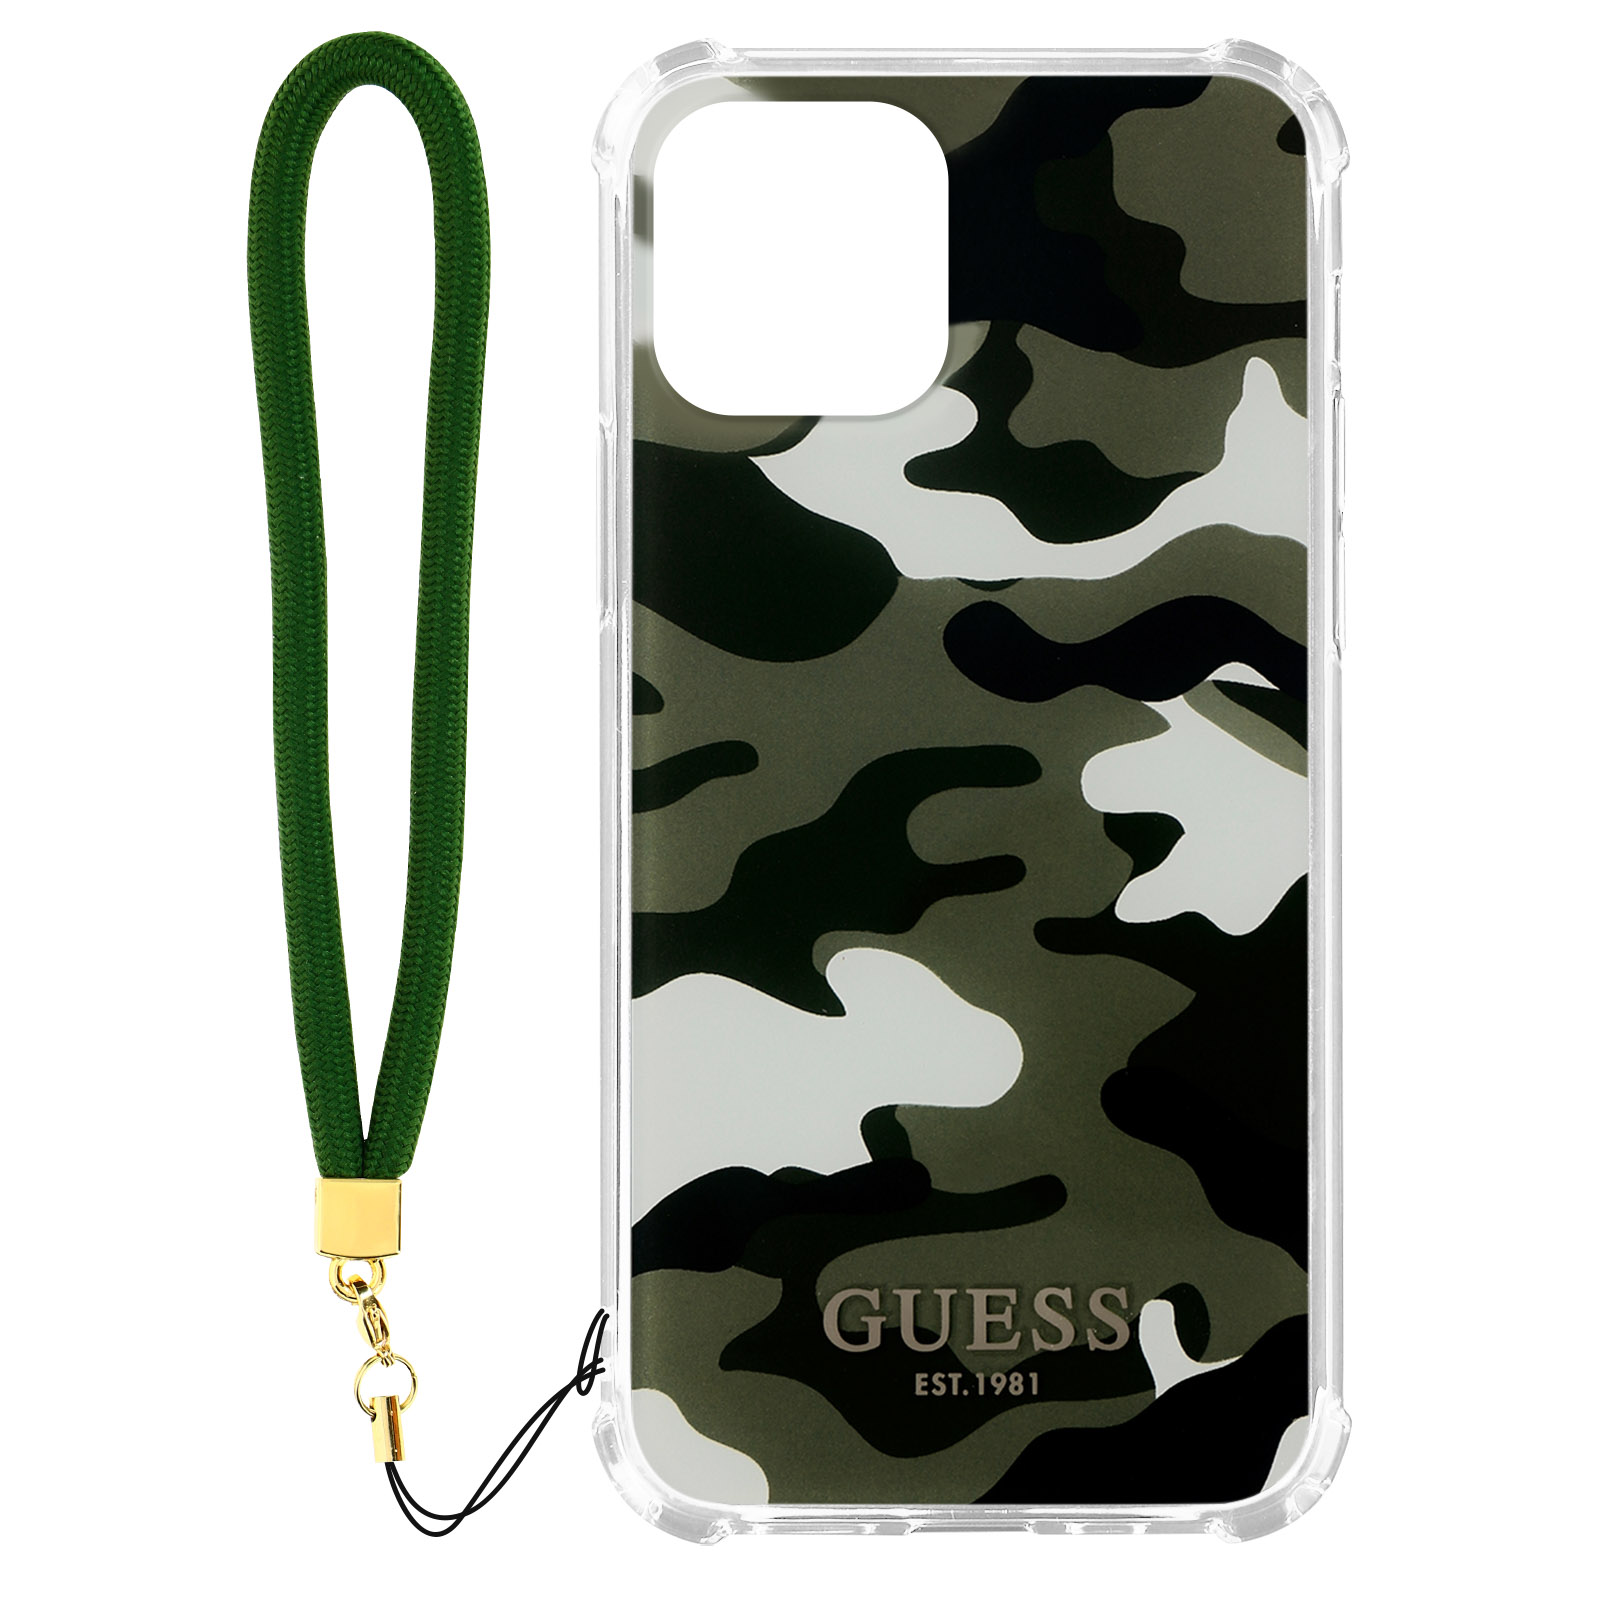 GUESS Camouflage Series, Max, Pro iPhone 12 Apple, Grün Backcover